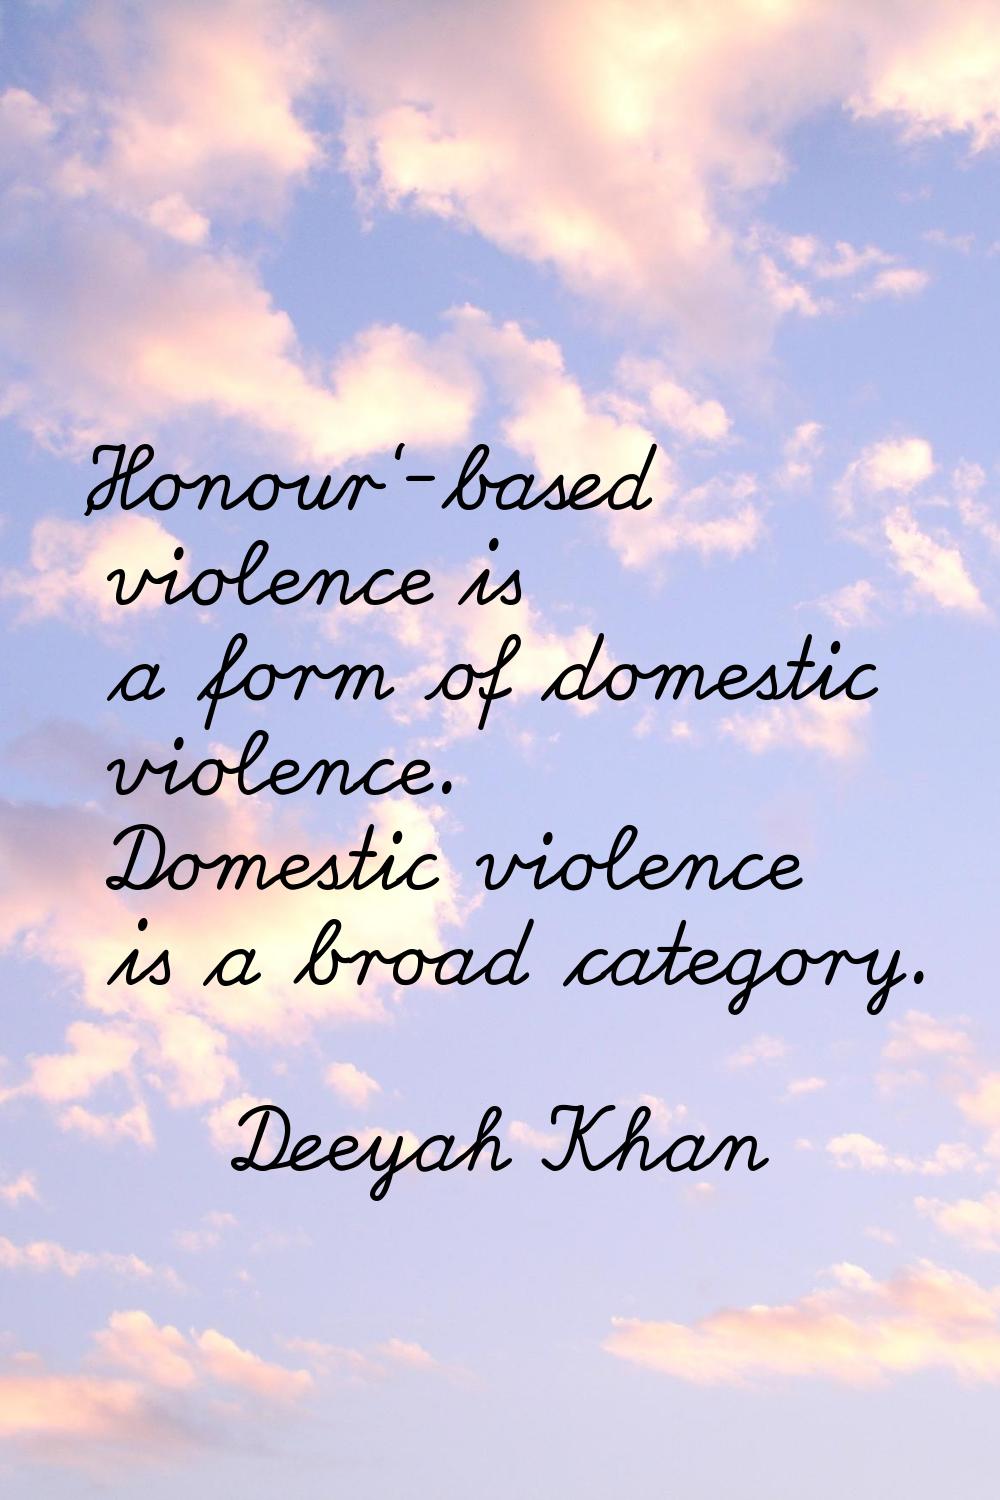 'Honour'-based violence is a form of domestic violence. Domestic violence is a broad category.